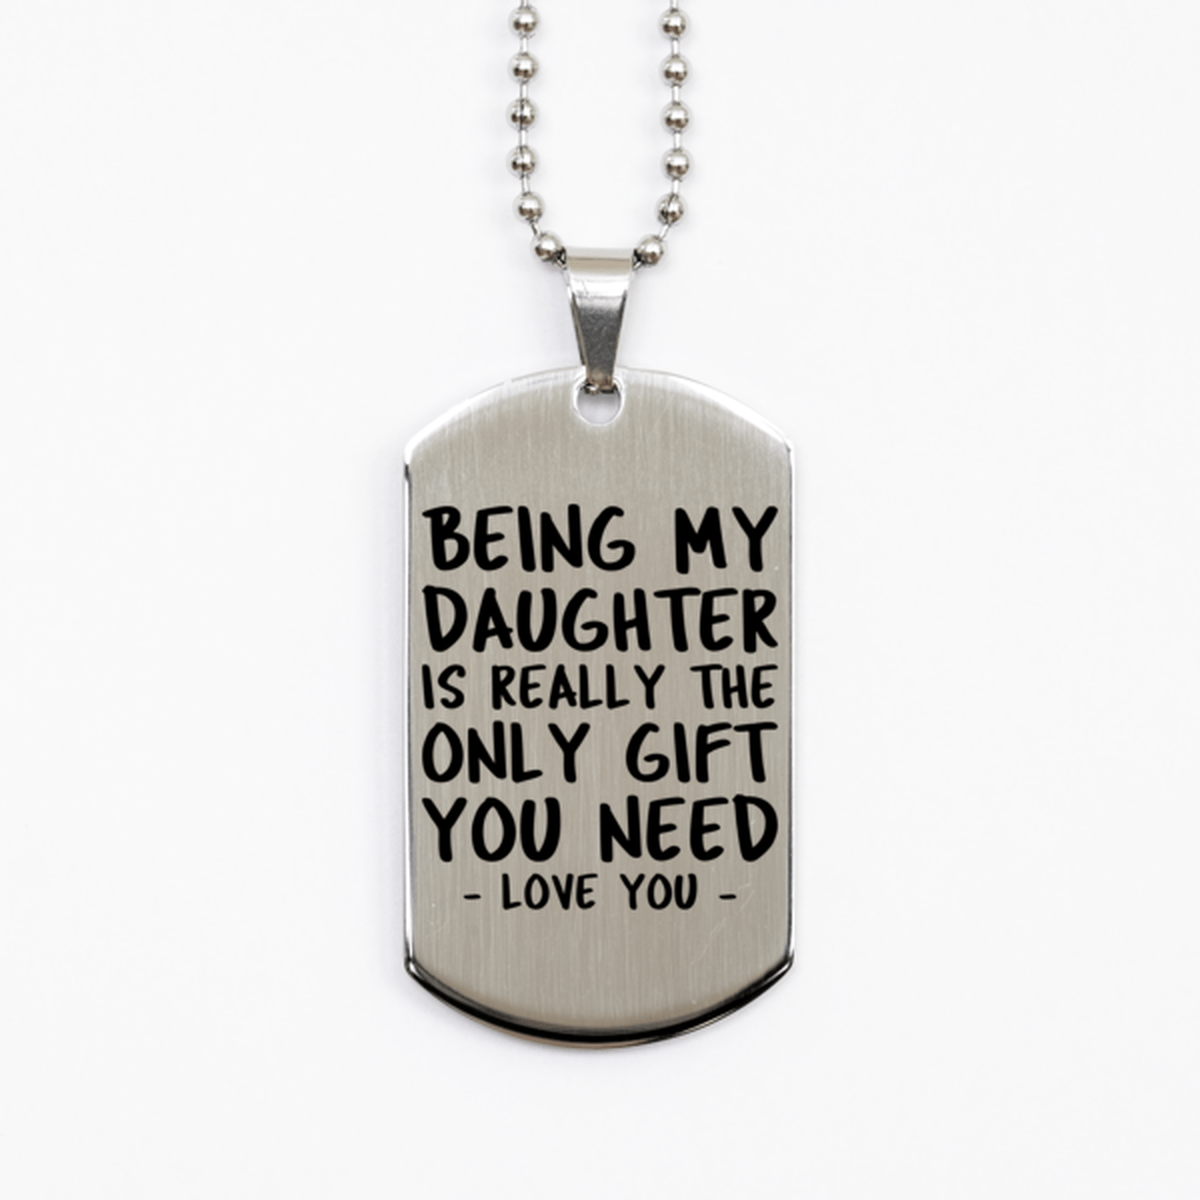 Funny Daughter Silver Dog Tag Necklace, Being My Daughter Is Really the Only Gift You Need, Best Birthday Gifts for Daughter